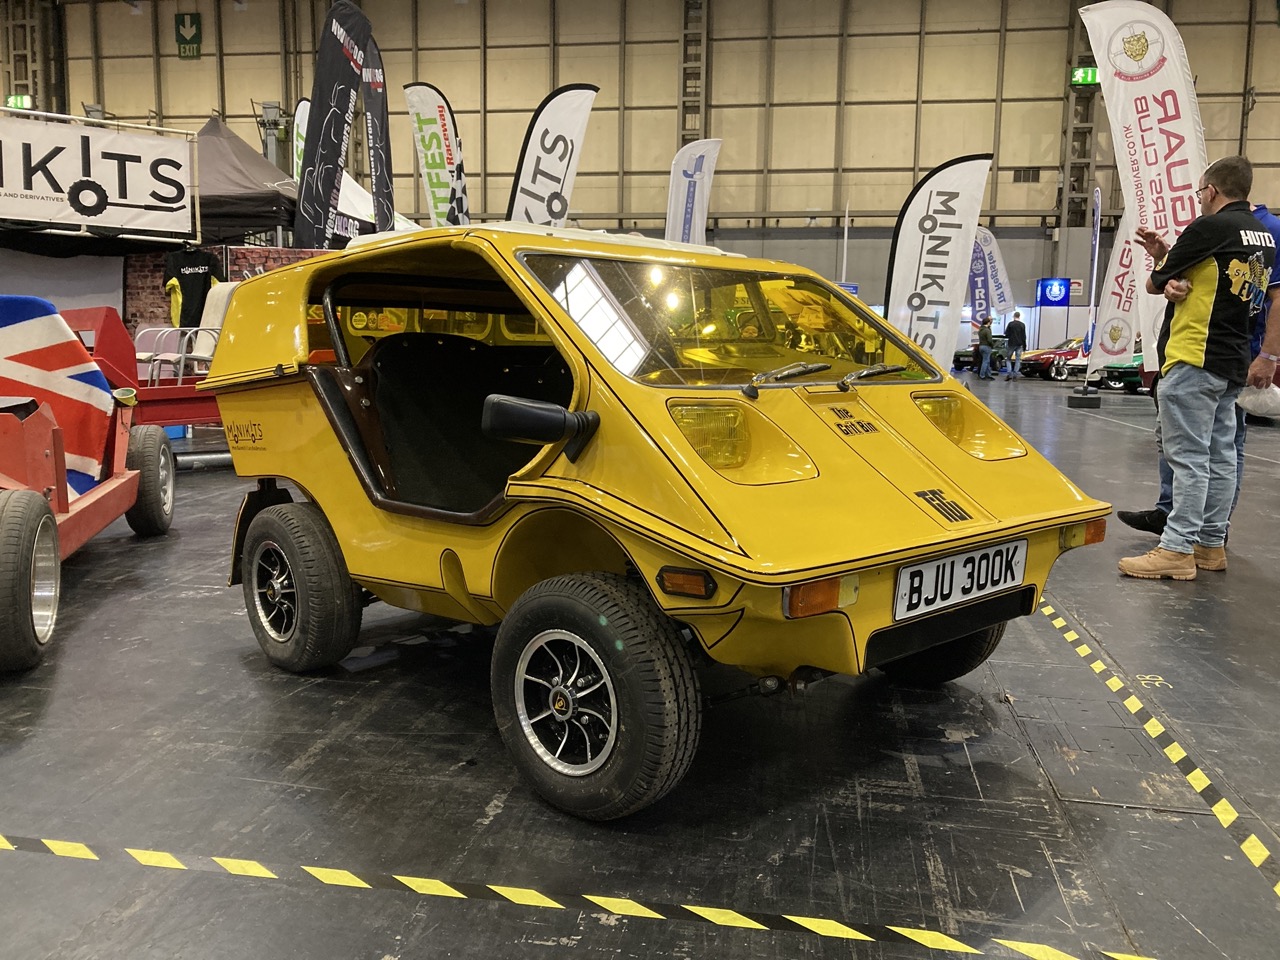 Your Classics: Paul Wylde's Truly Titchy TiCi Kit Car